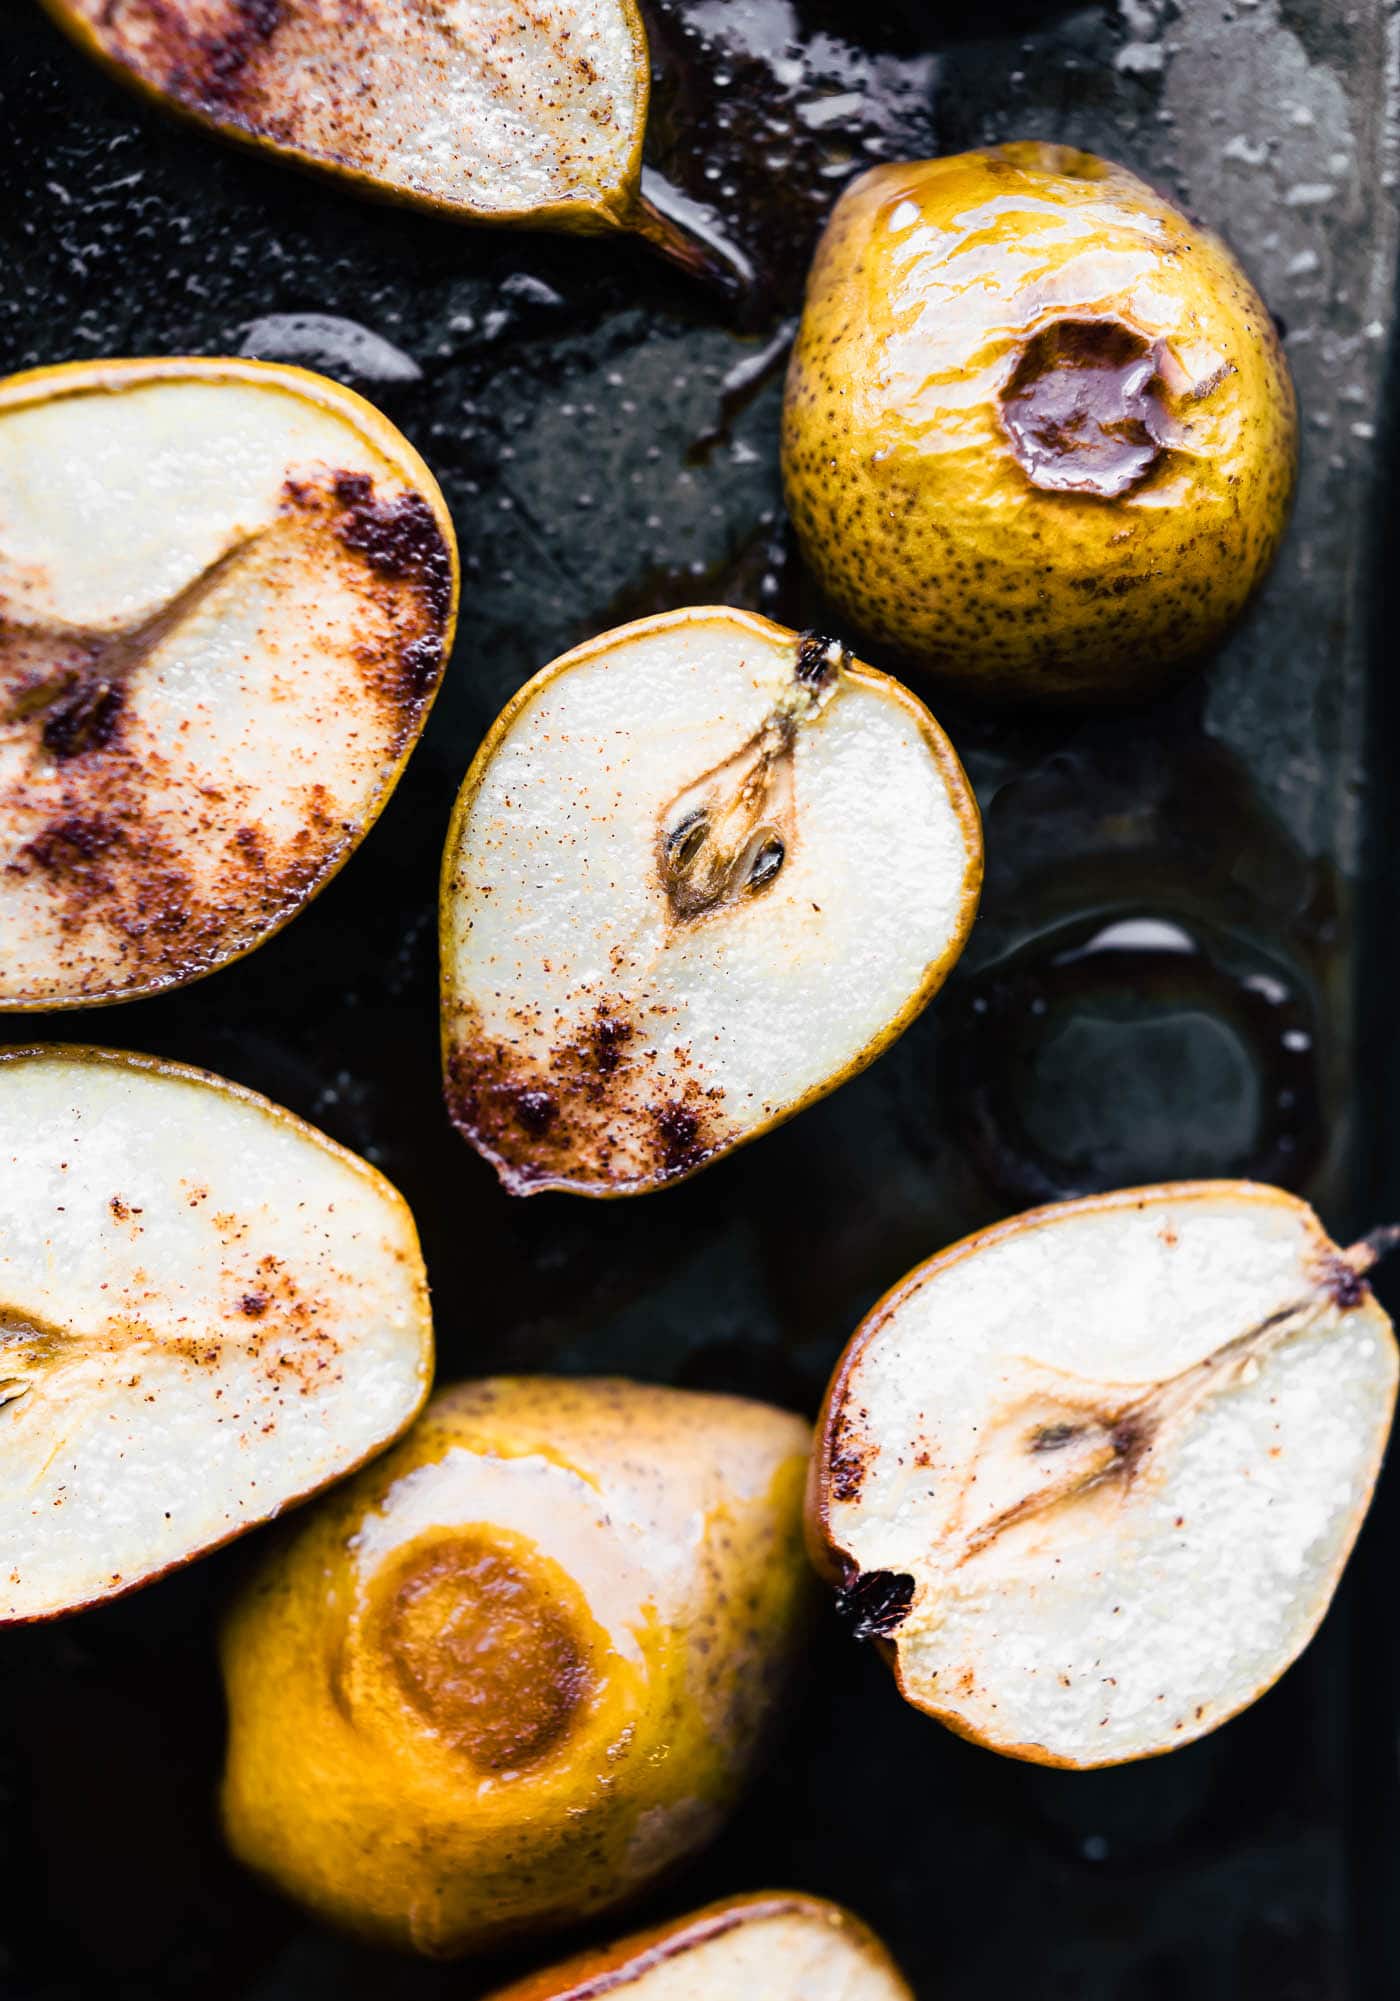 baked pears on sheet plan, sliced with spices